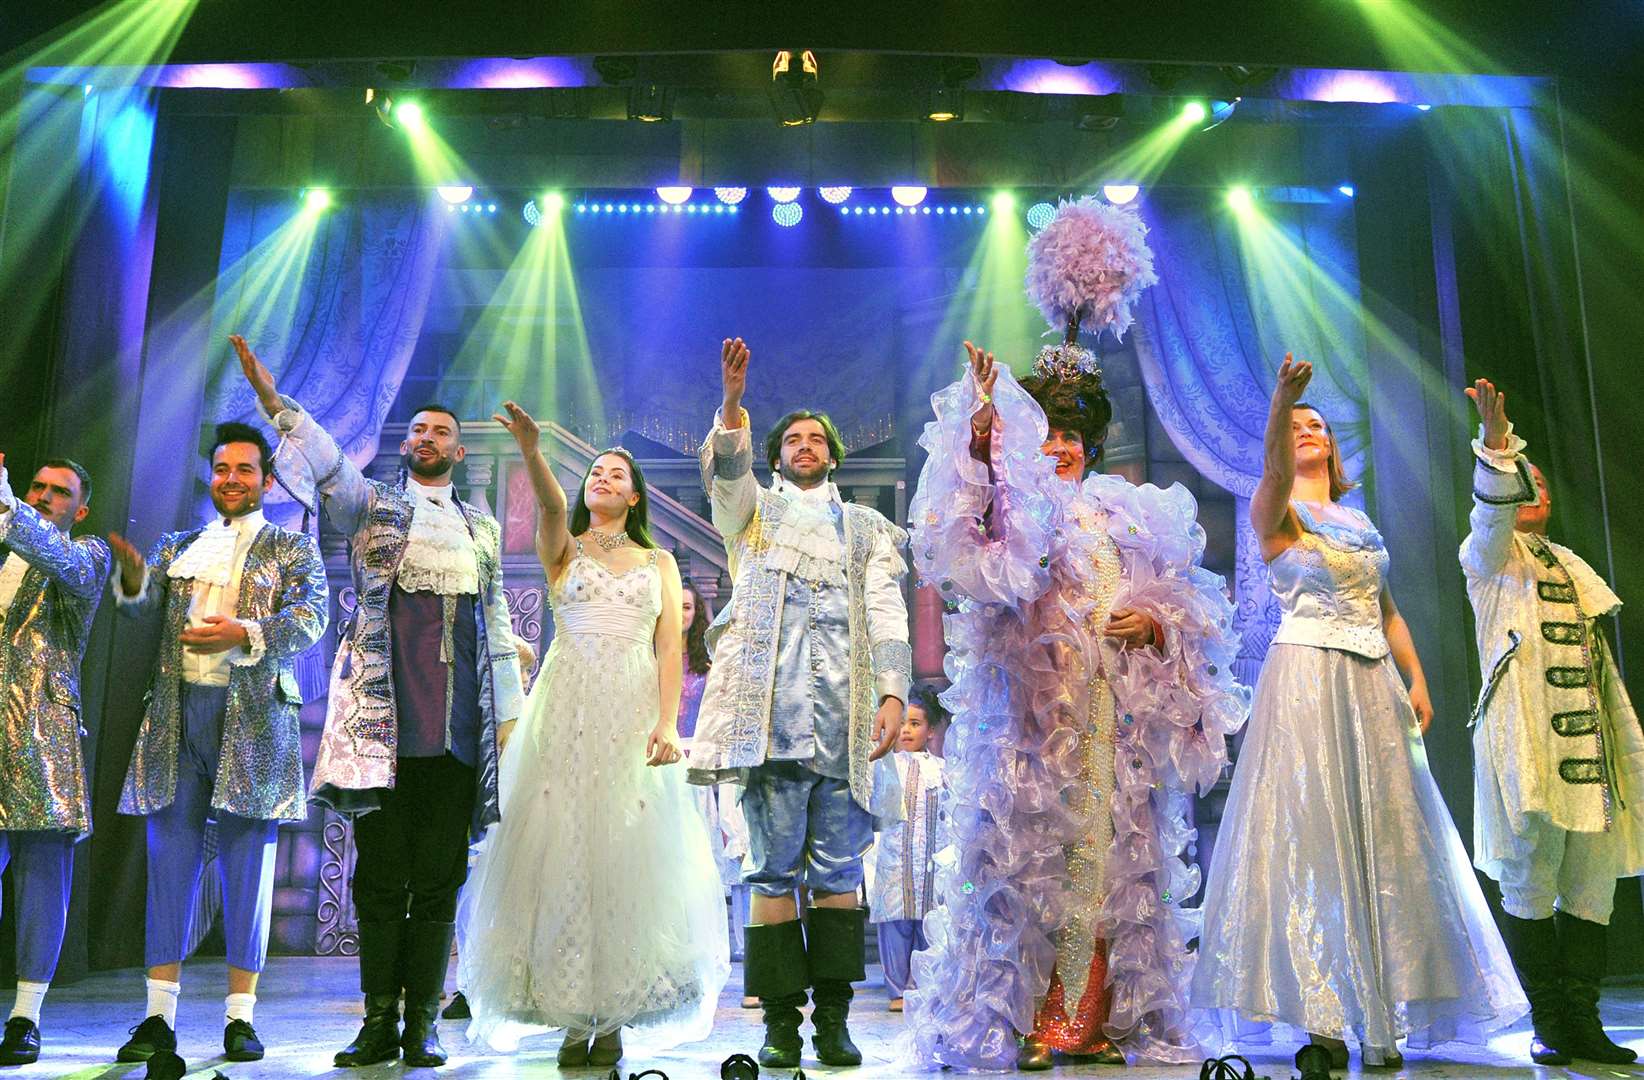 Beauty and the Beast at the Hazlitt Theatre in 2019